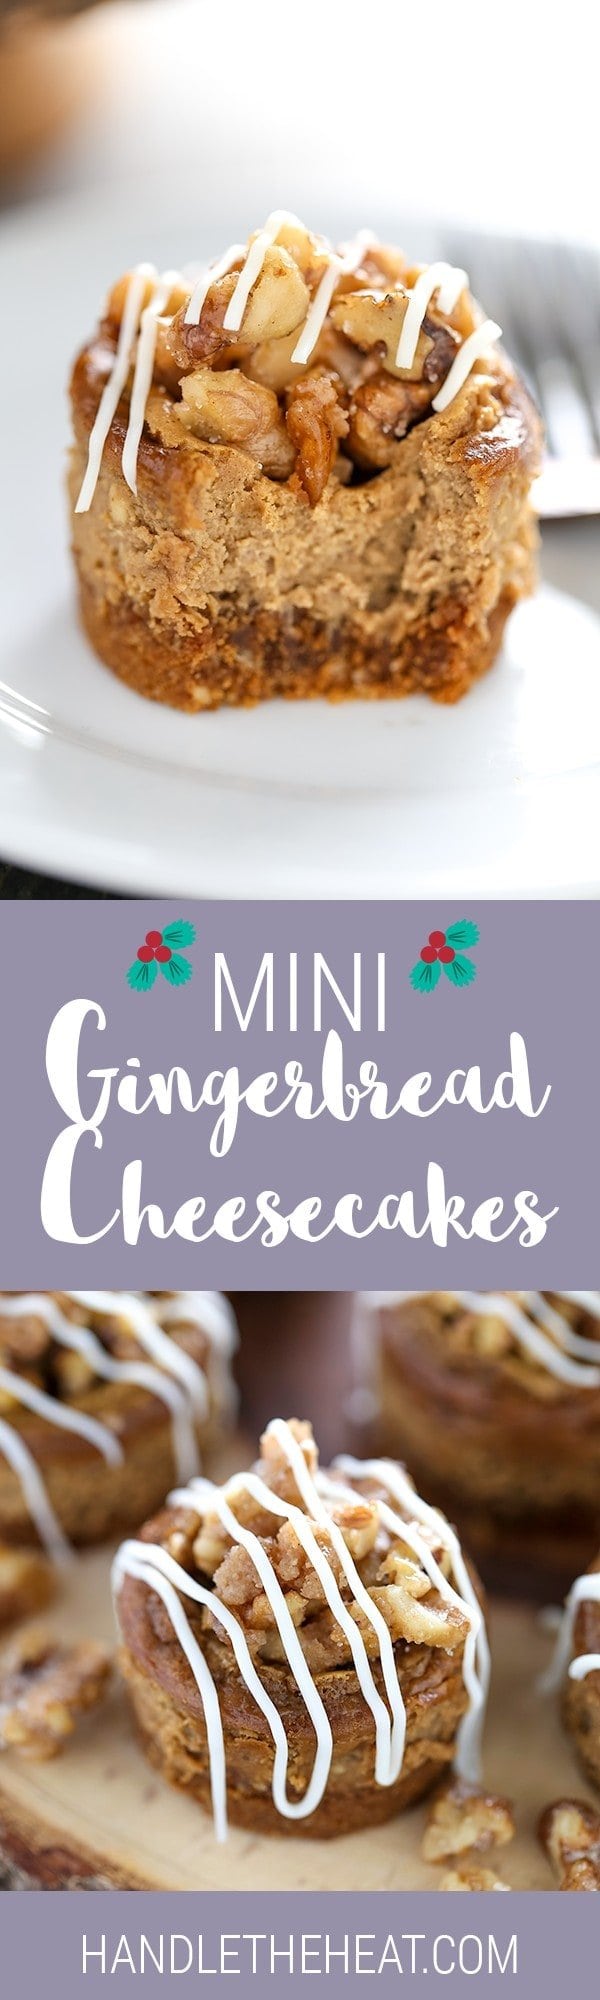 YUM!! This is the perfect festive recipe for easy entertaining! Such a crowd pleaser!